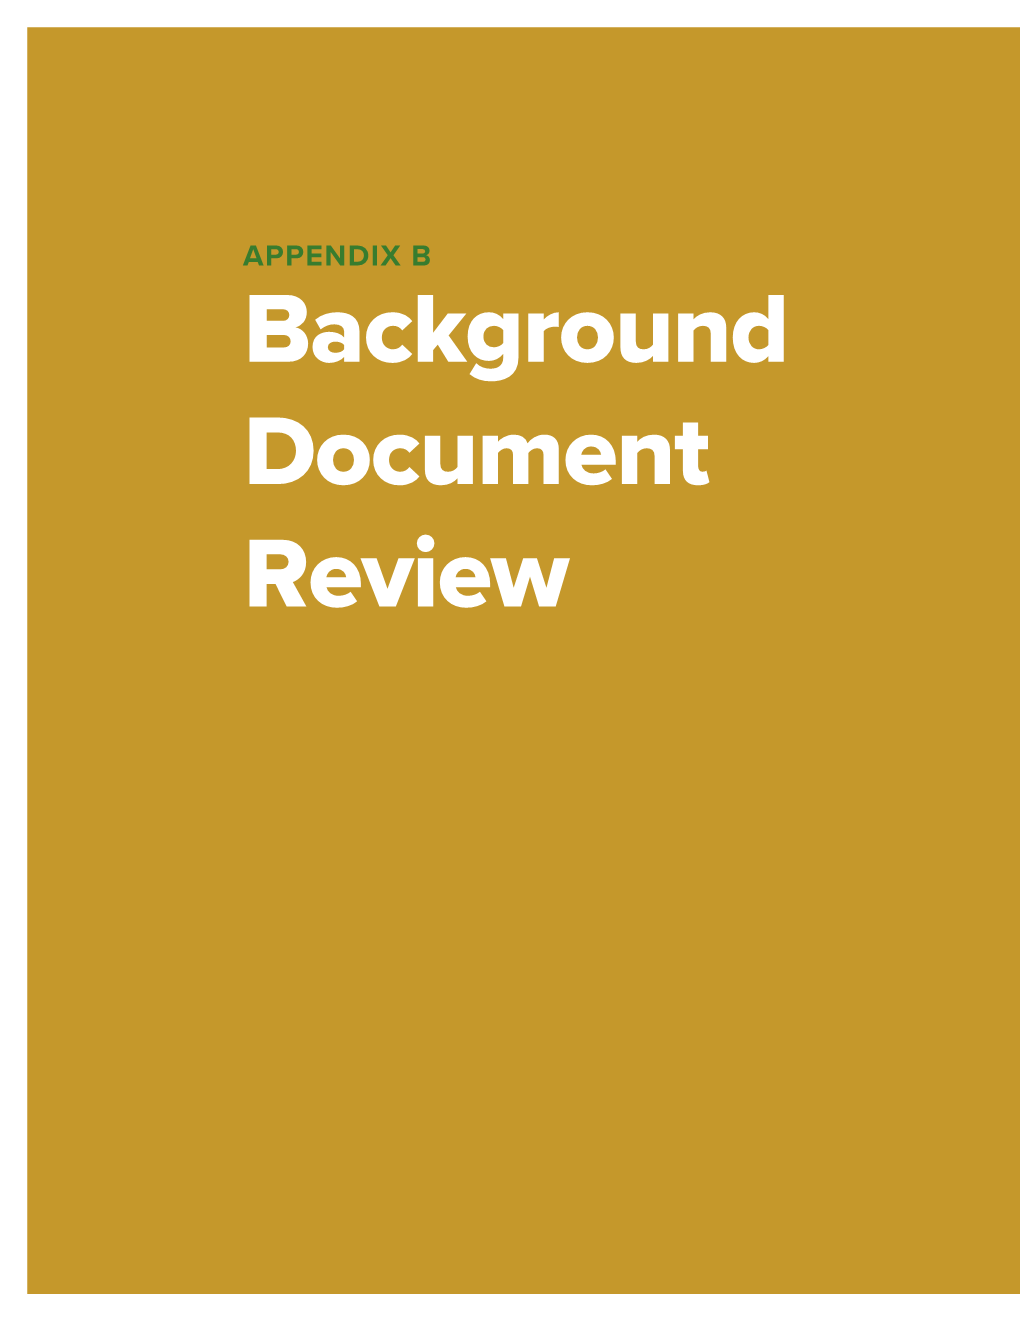 Background Document Review